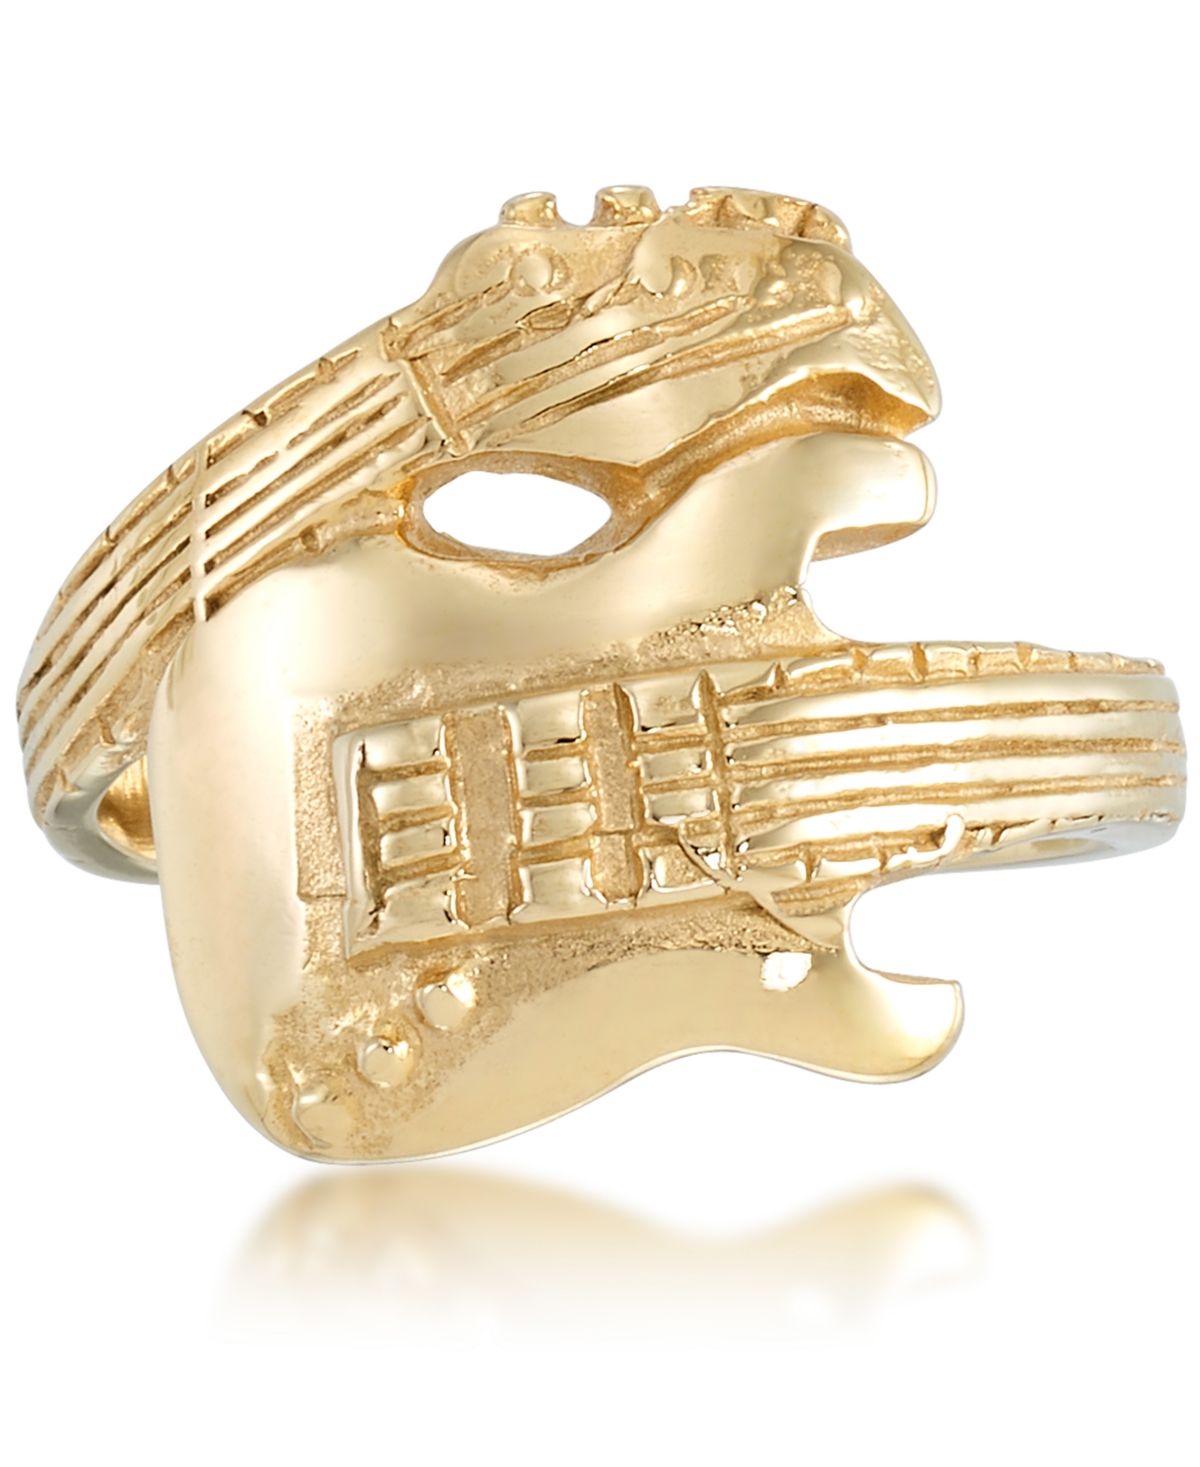 Andrew Charles by Andy Hilfiger Men's Guitar Ring in Yellow Ion-Plated Stainless Steel